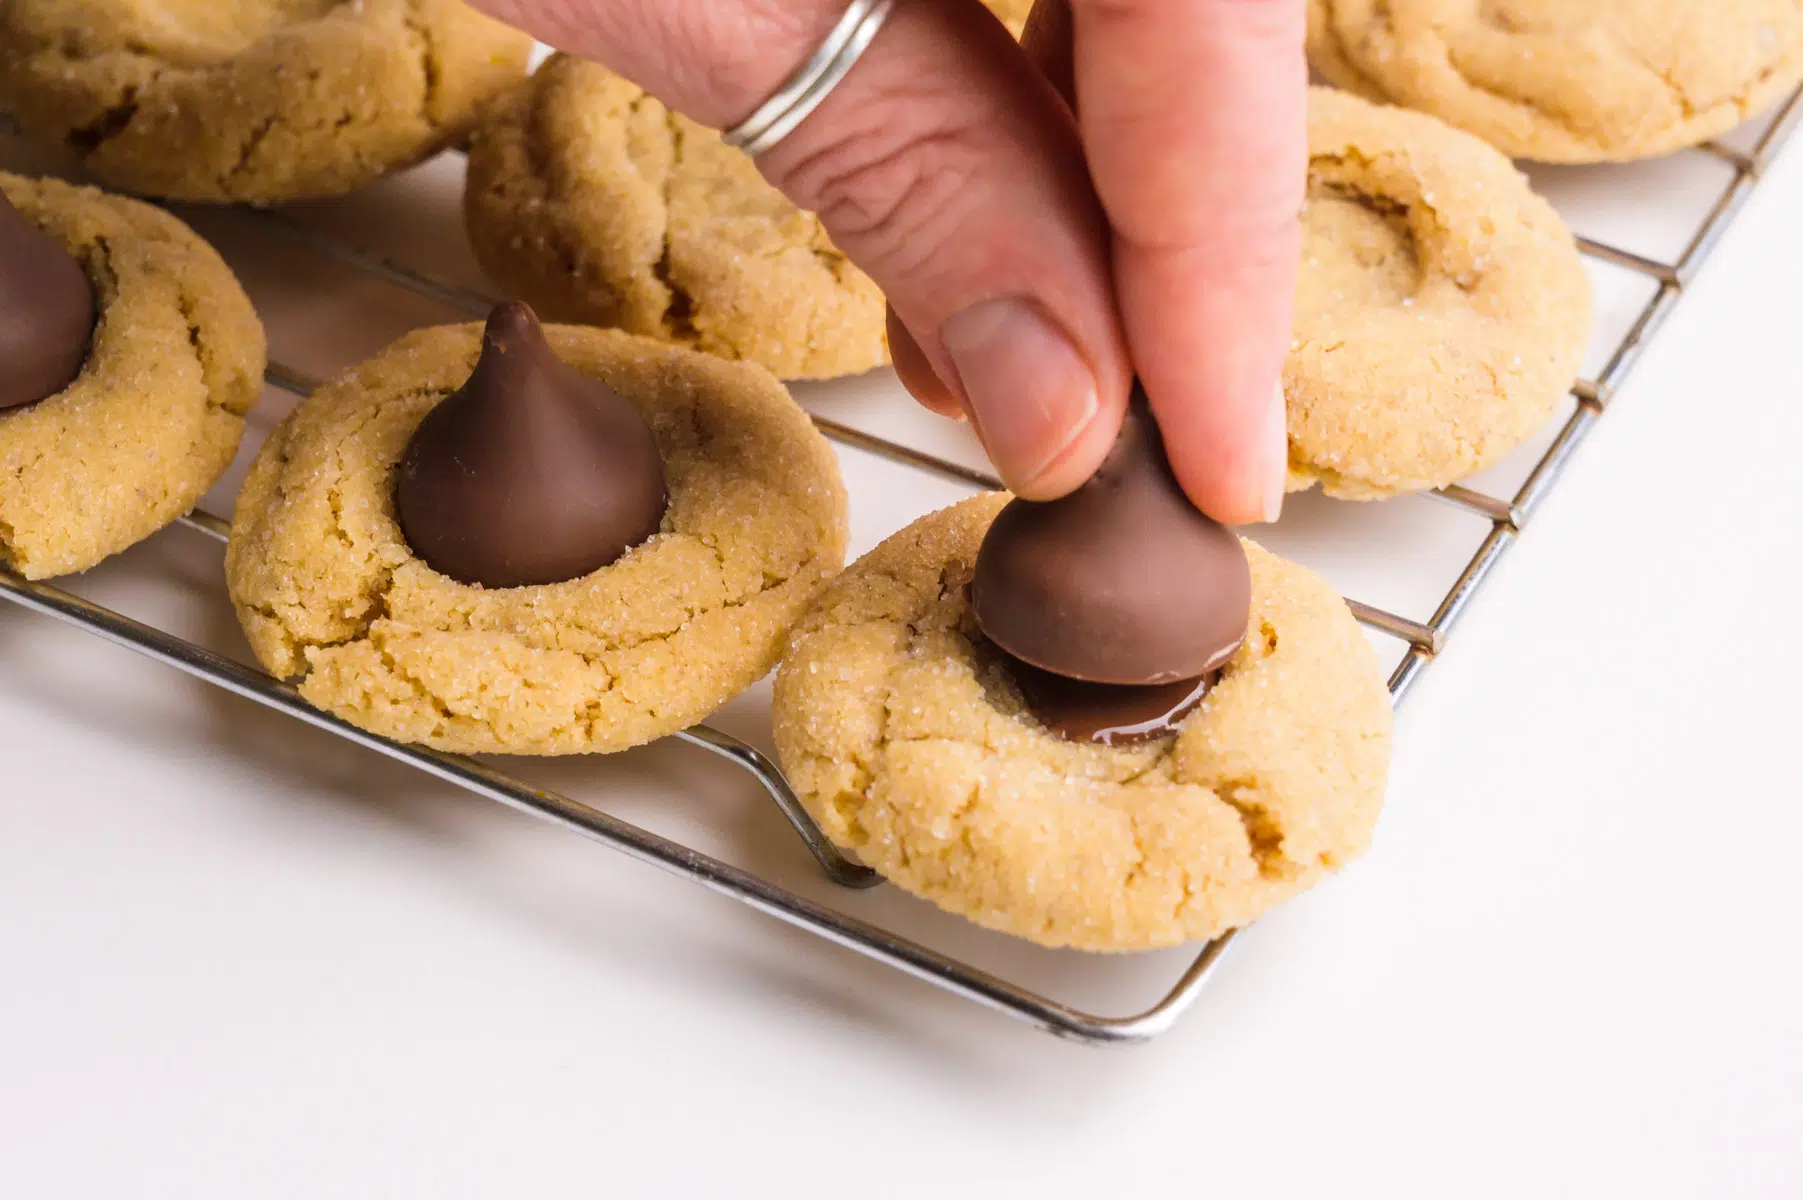 A hand holds a vegan chocolate kiss and is pressing it into the center of peanut butter cookies.